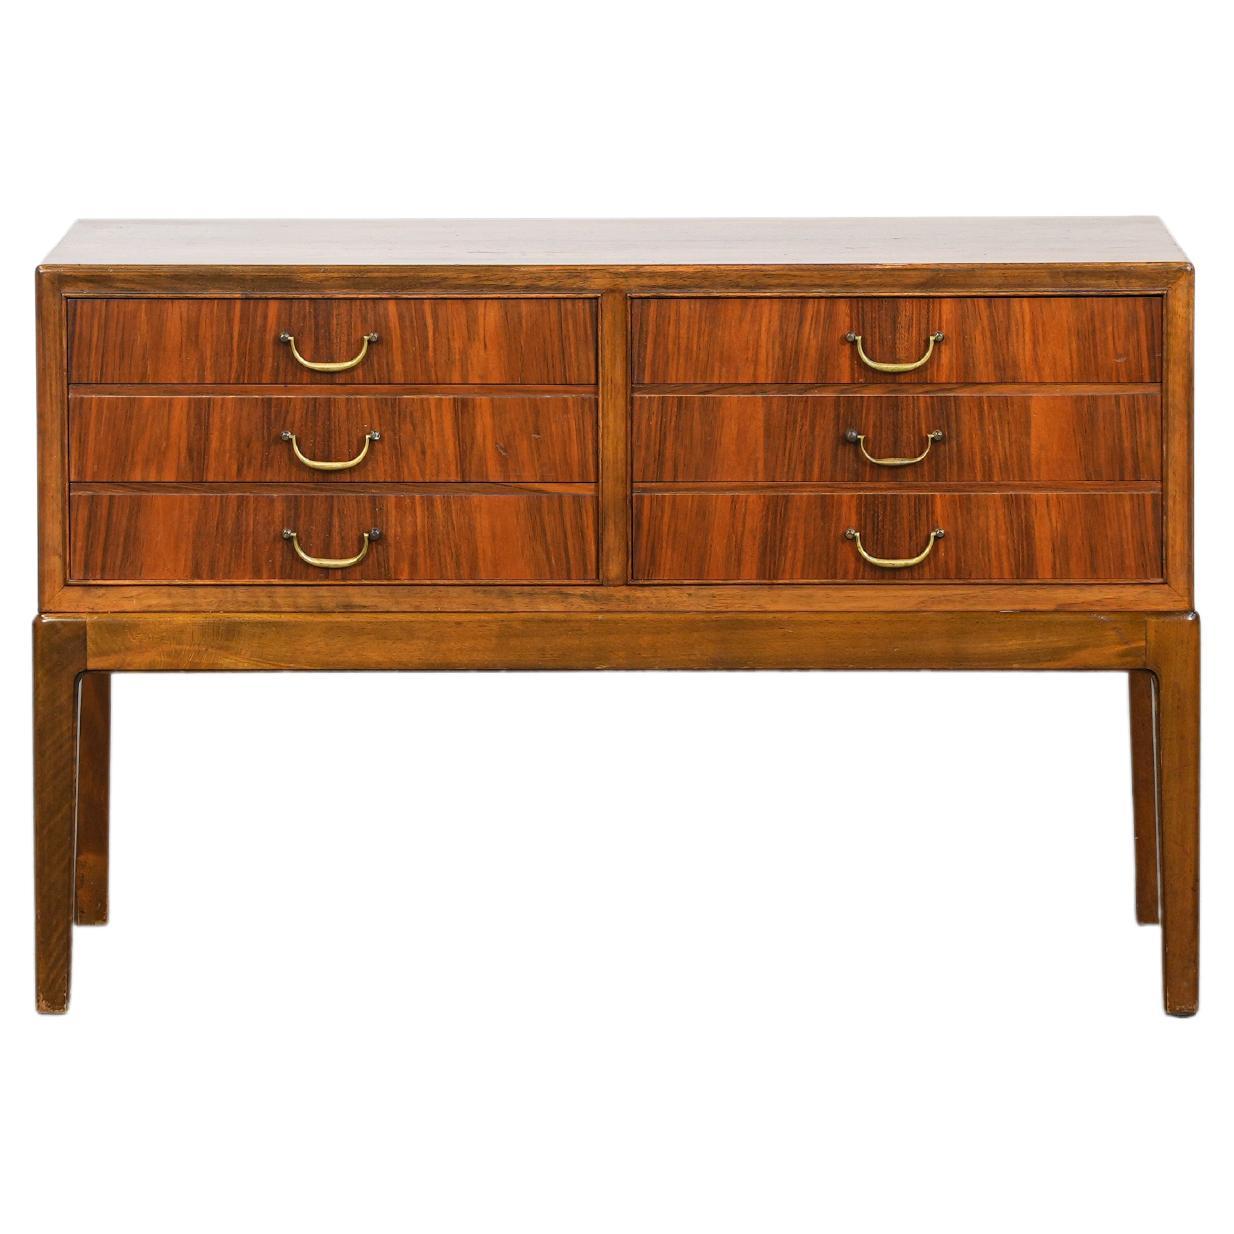 Rare Commode in Walnut by Ole Wanscher Made in Denmark in the 1940s For Sale